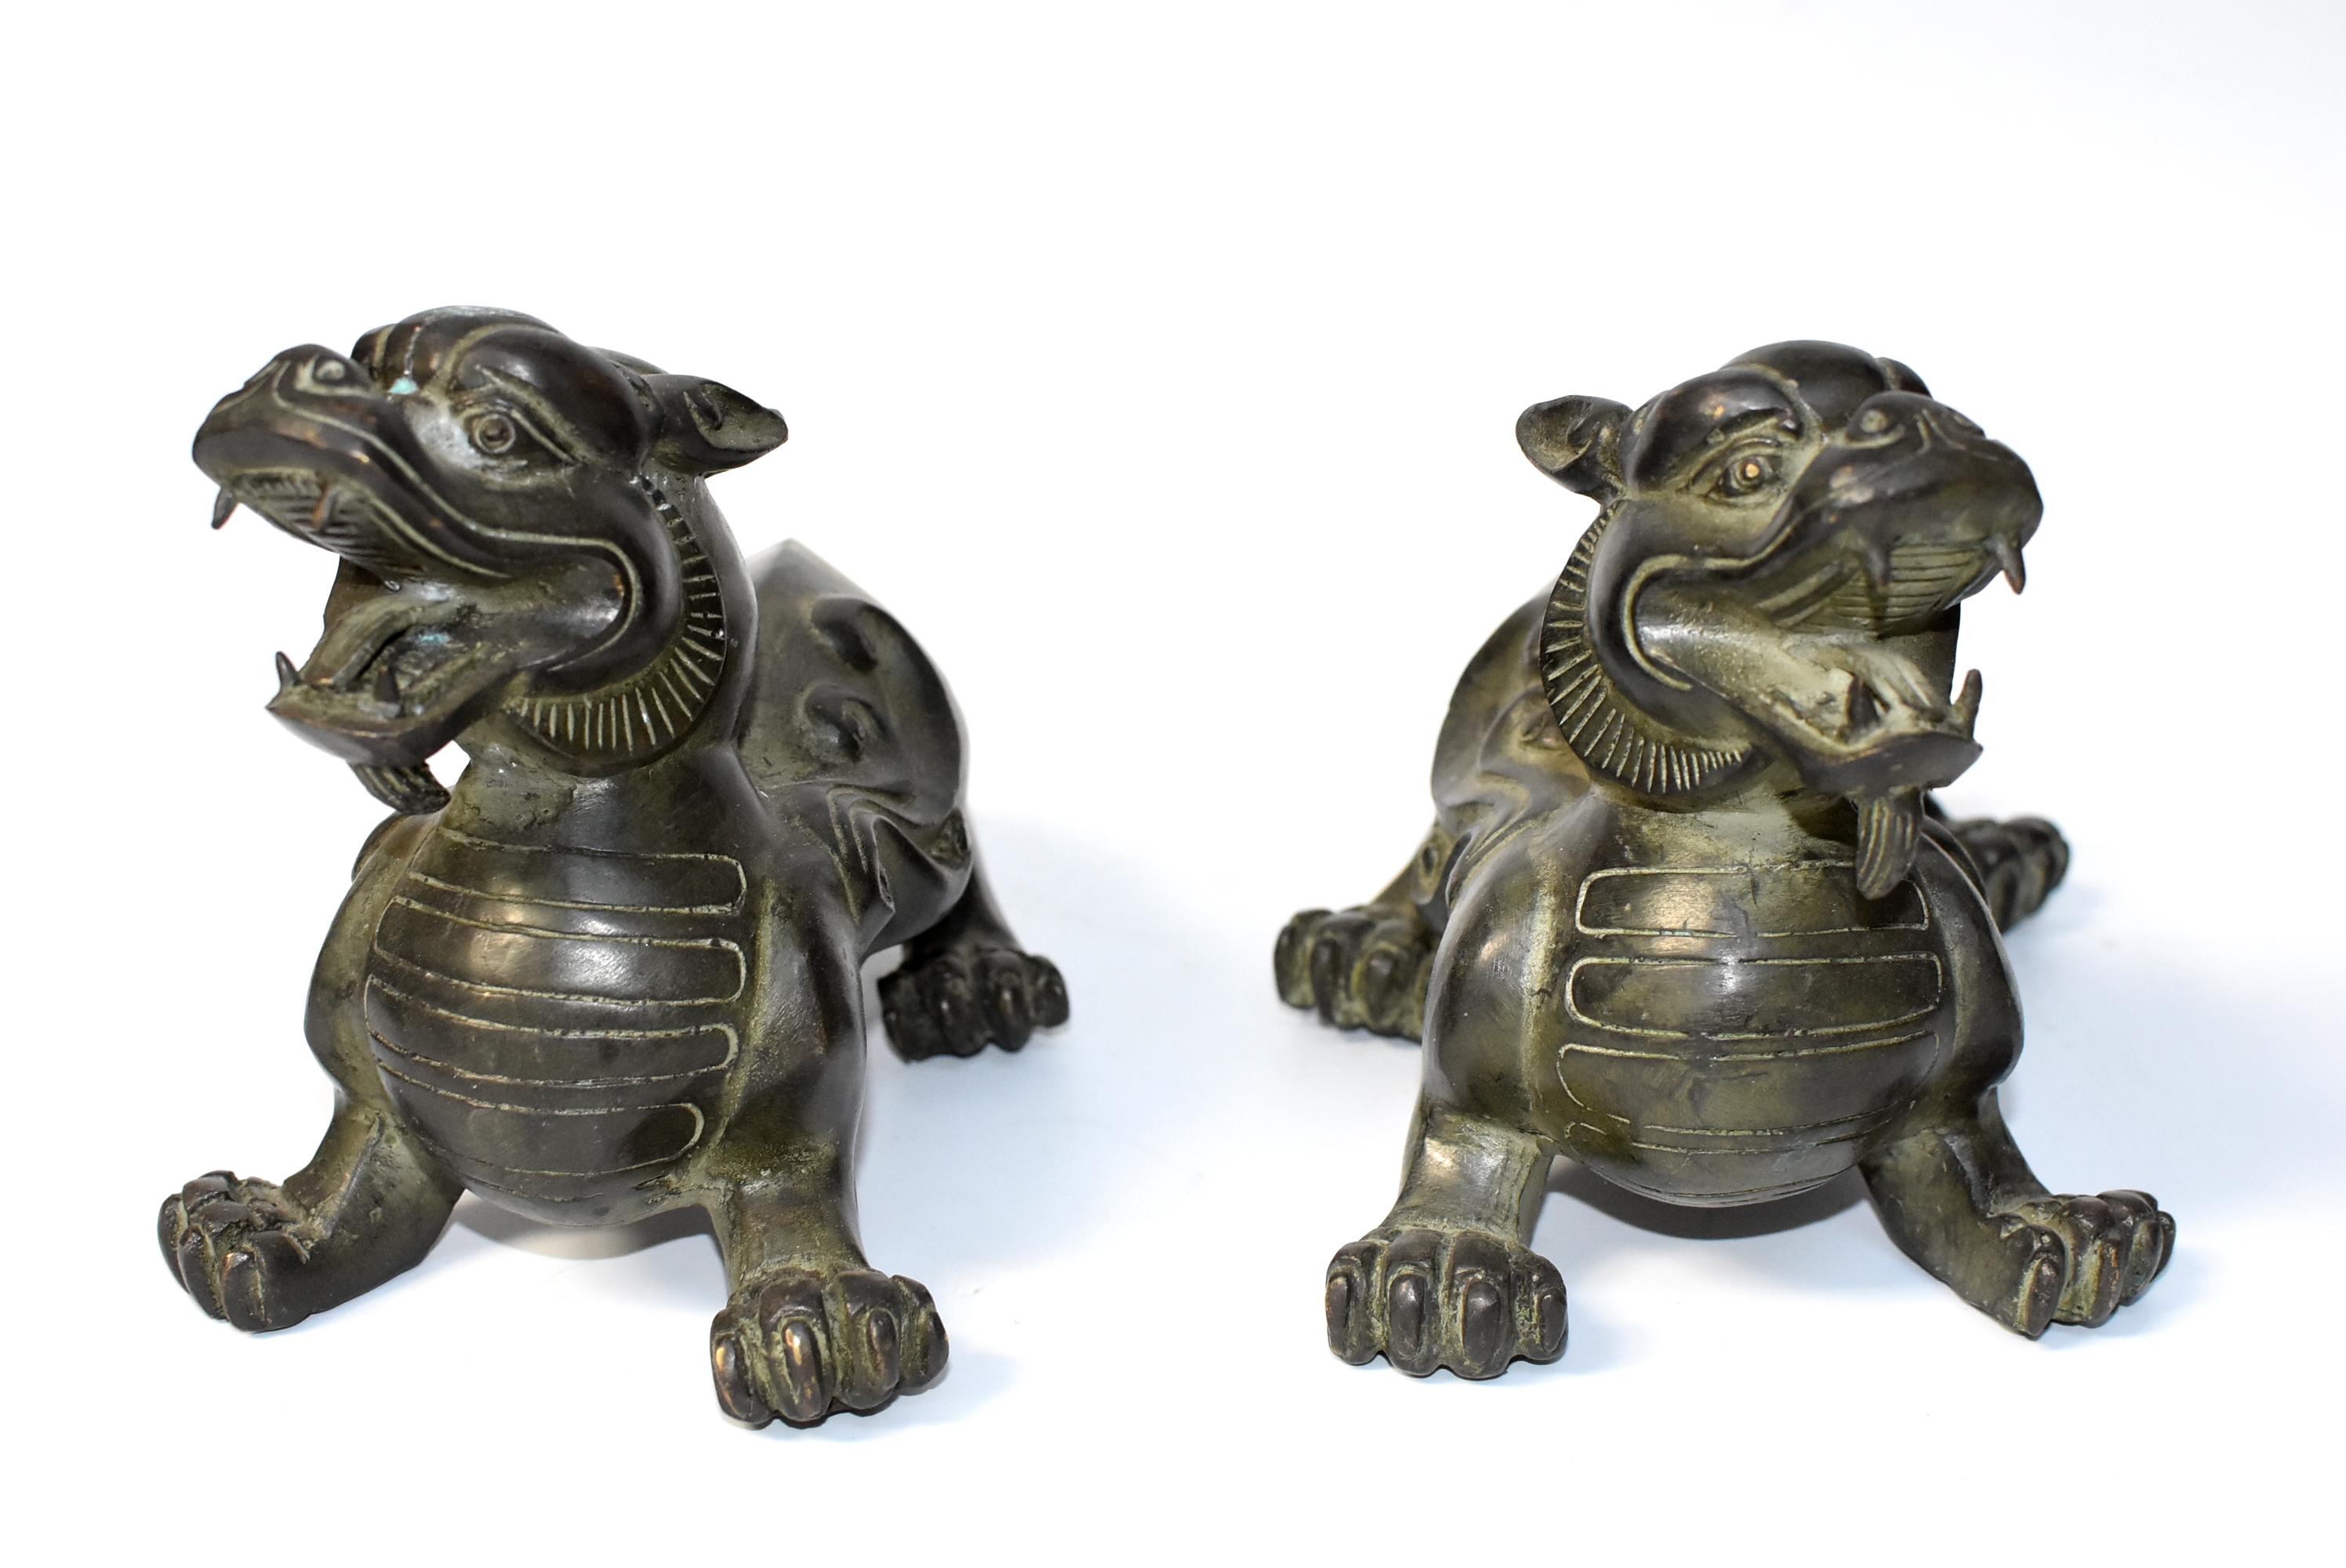 A pair of beautiful bronze pixiu lions. These are mythical beasts believed to bring and keep tremendous wealth. Fine craftsmanship and vivid expressions. Detailed works throughout. This particular pair has interesting turtle shells, symbolizing